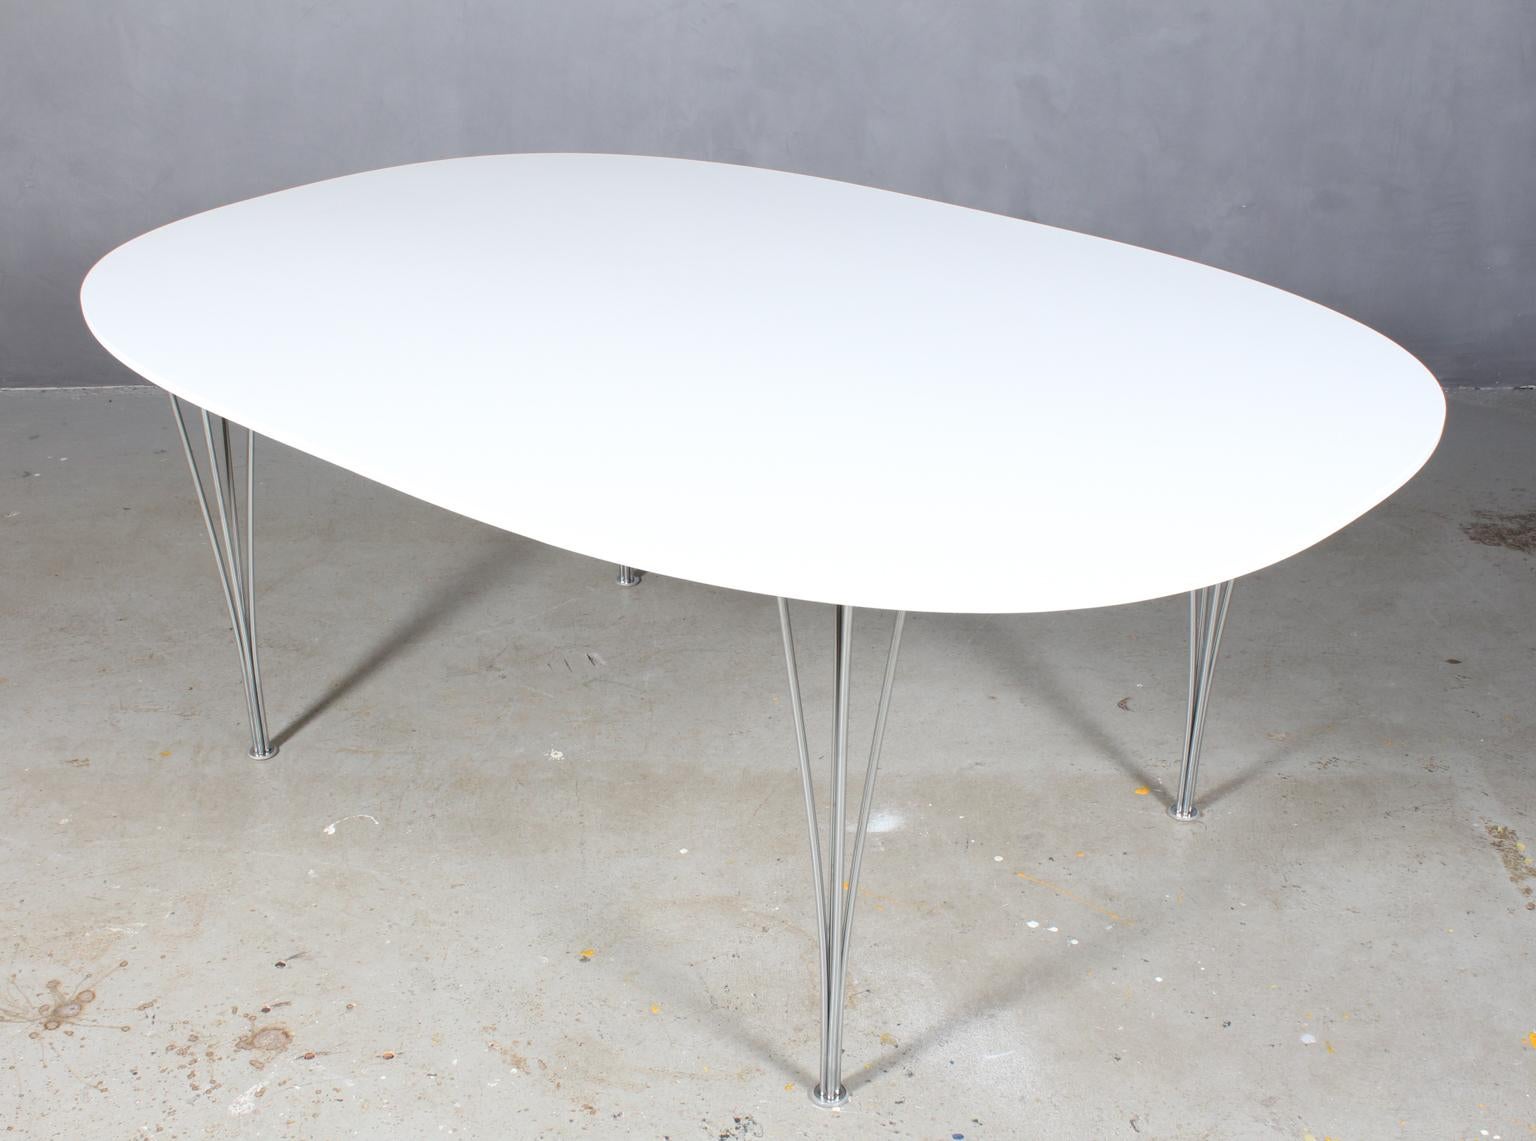 Piet Hein & Bruno Mathsson Elipse dining table white lacquered.

Legs in chromed steel.

Made by Fritz Hansen.

New lacquered by professional car painter.